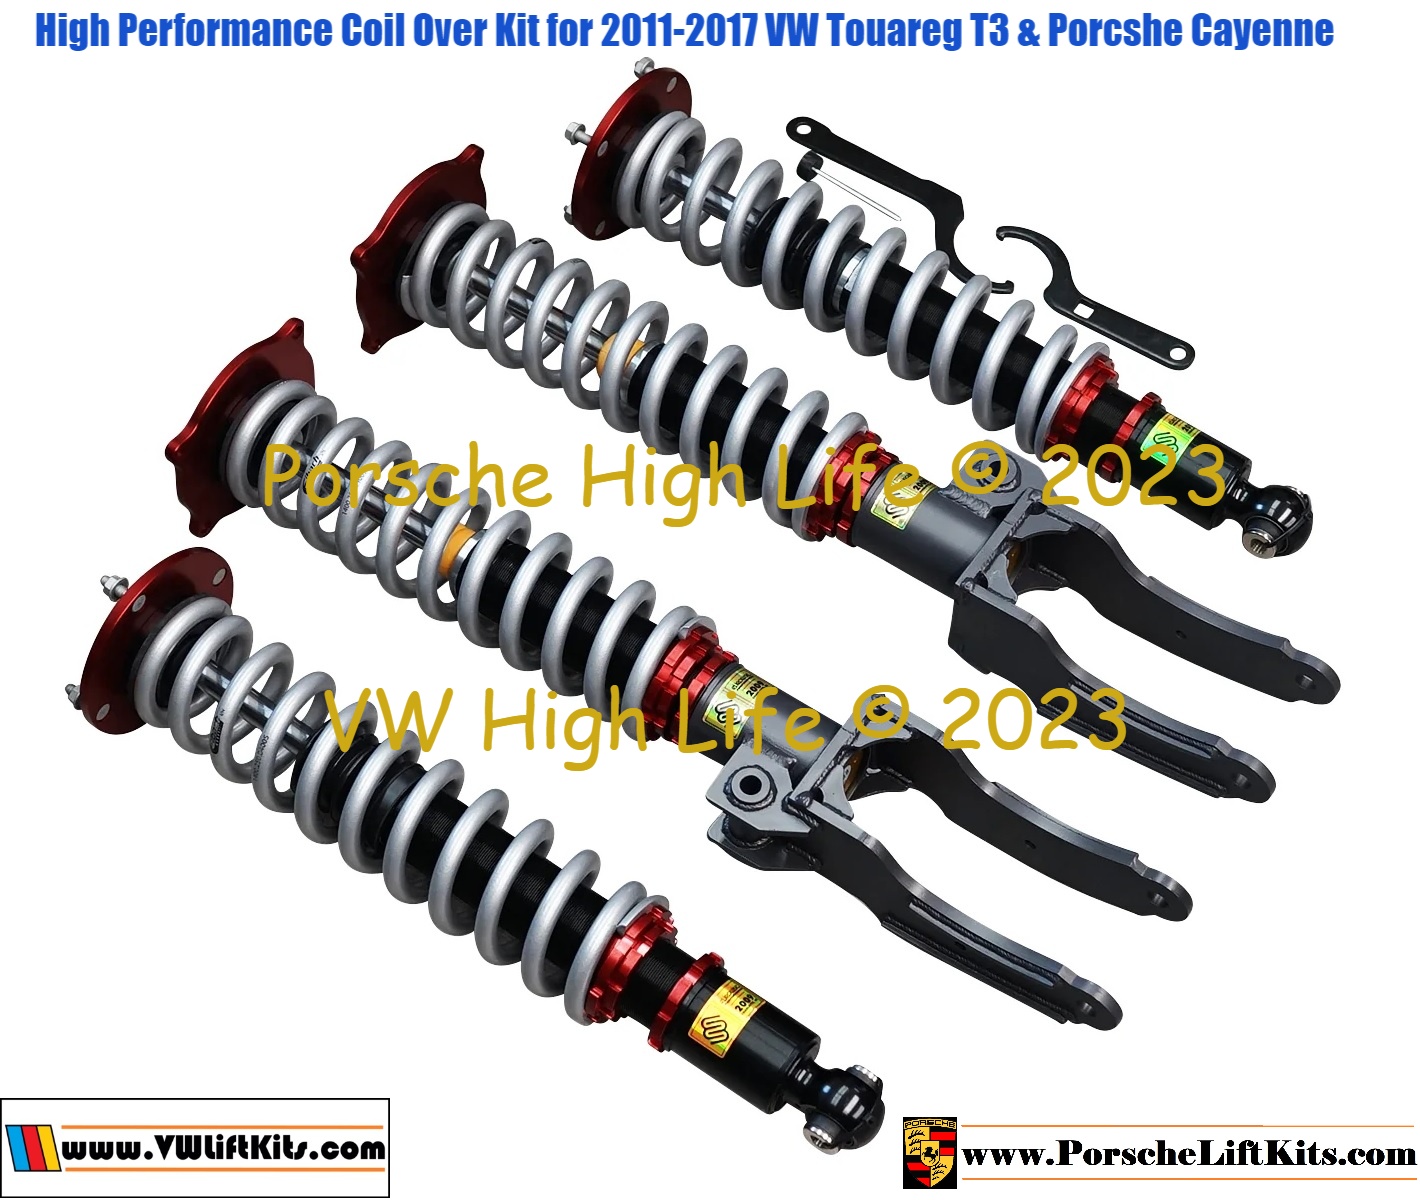 Custom Coilovers for 2011-2017 Porsche Cayenne 958 and VW Touareg T3 $2200 USD